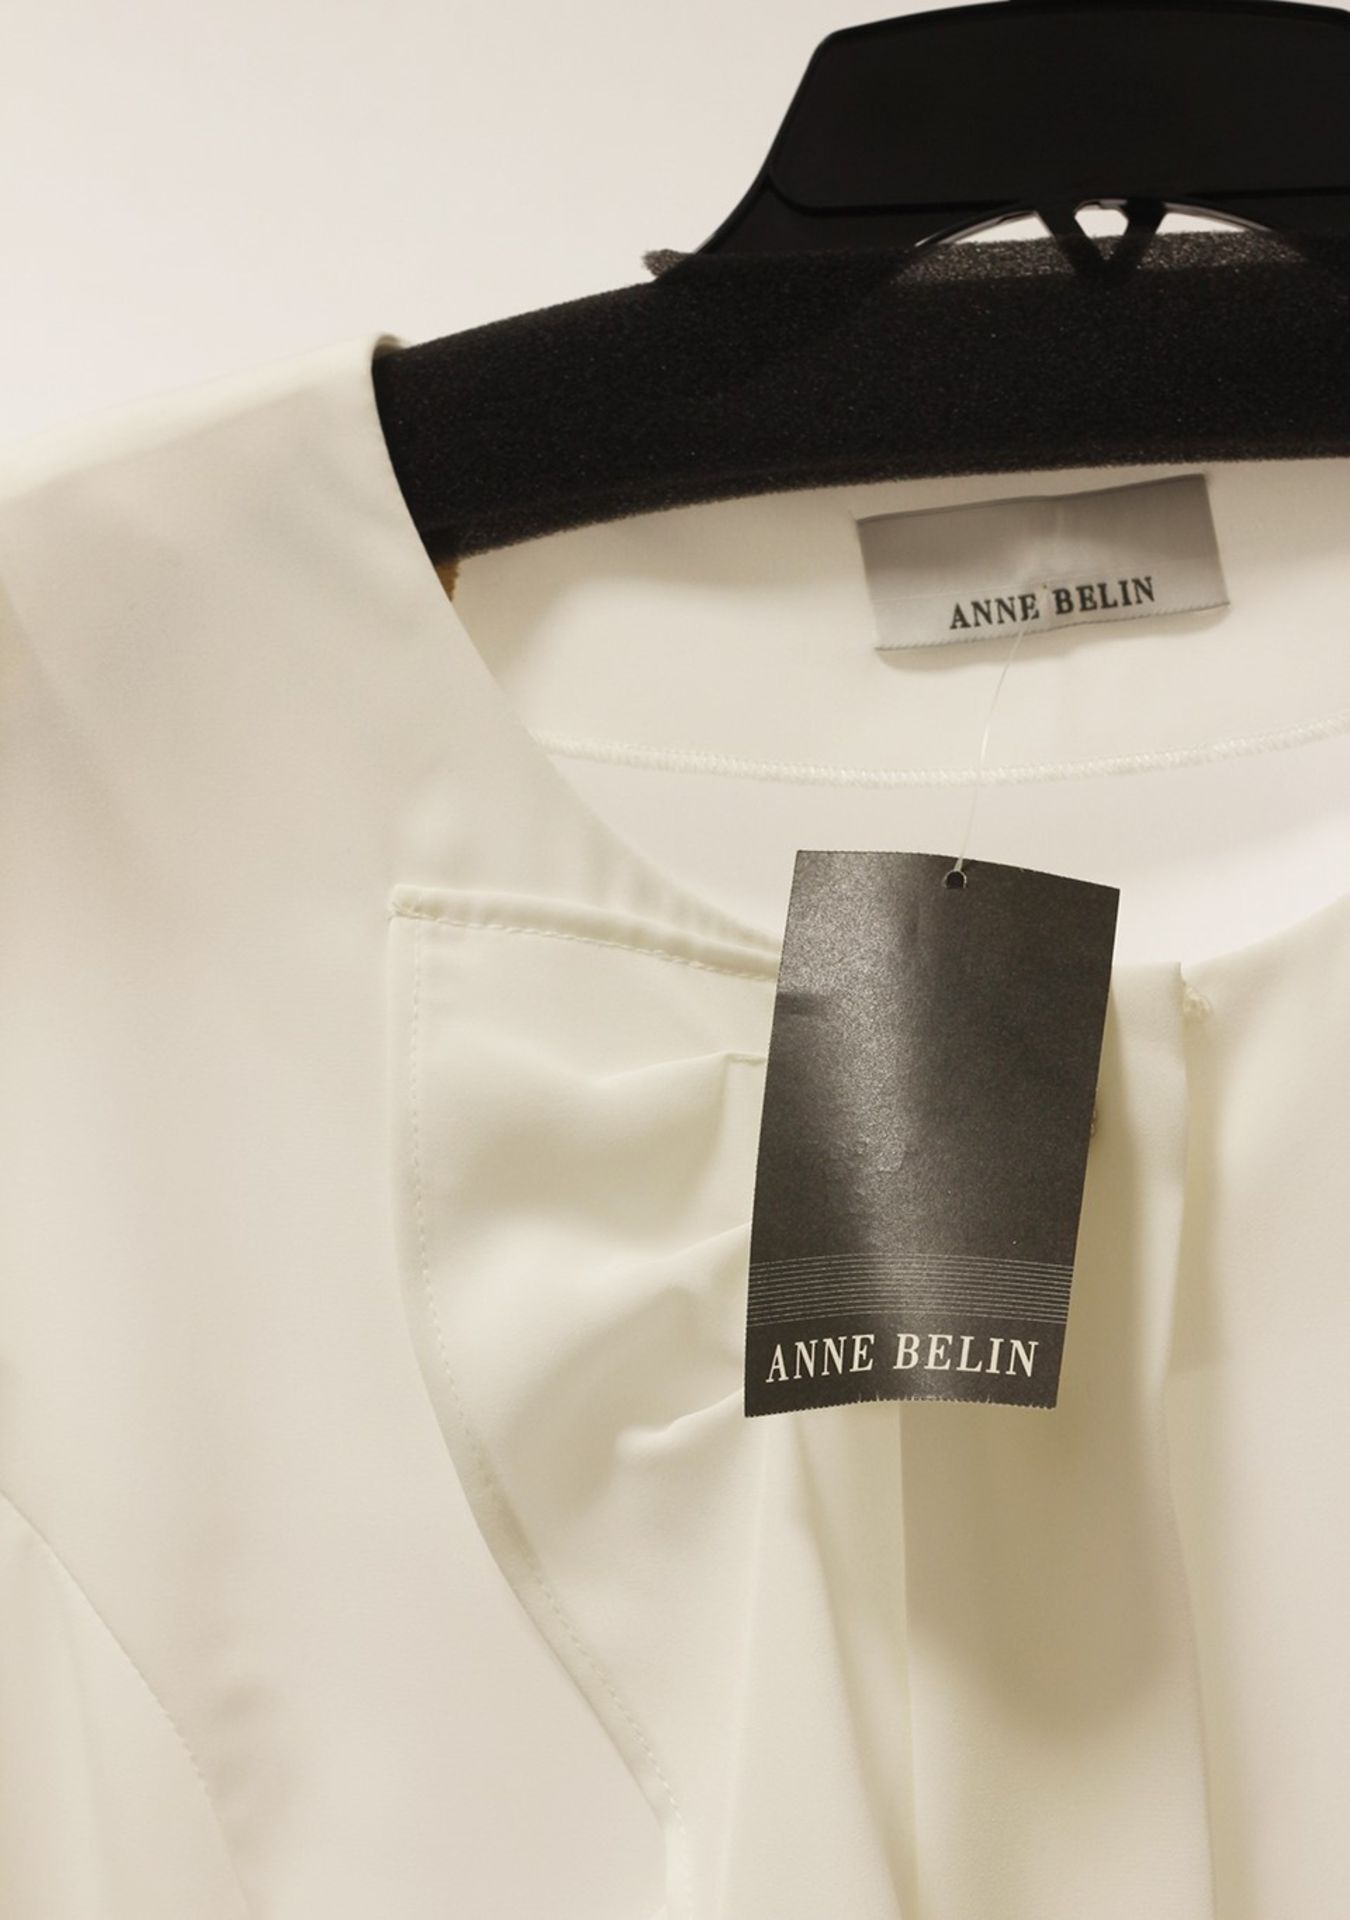 1 x Anne Belin White Shirt - Size: 18 - Material: 100% Polyester - From a High End Clothing Boutique - Image 4 of 9